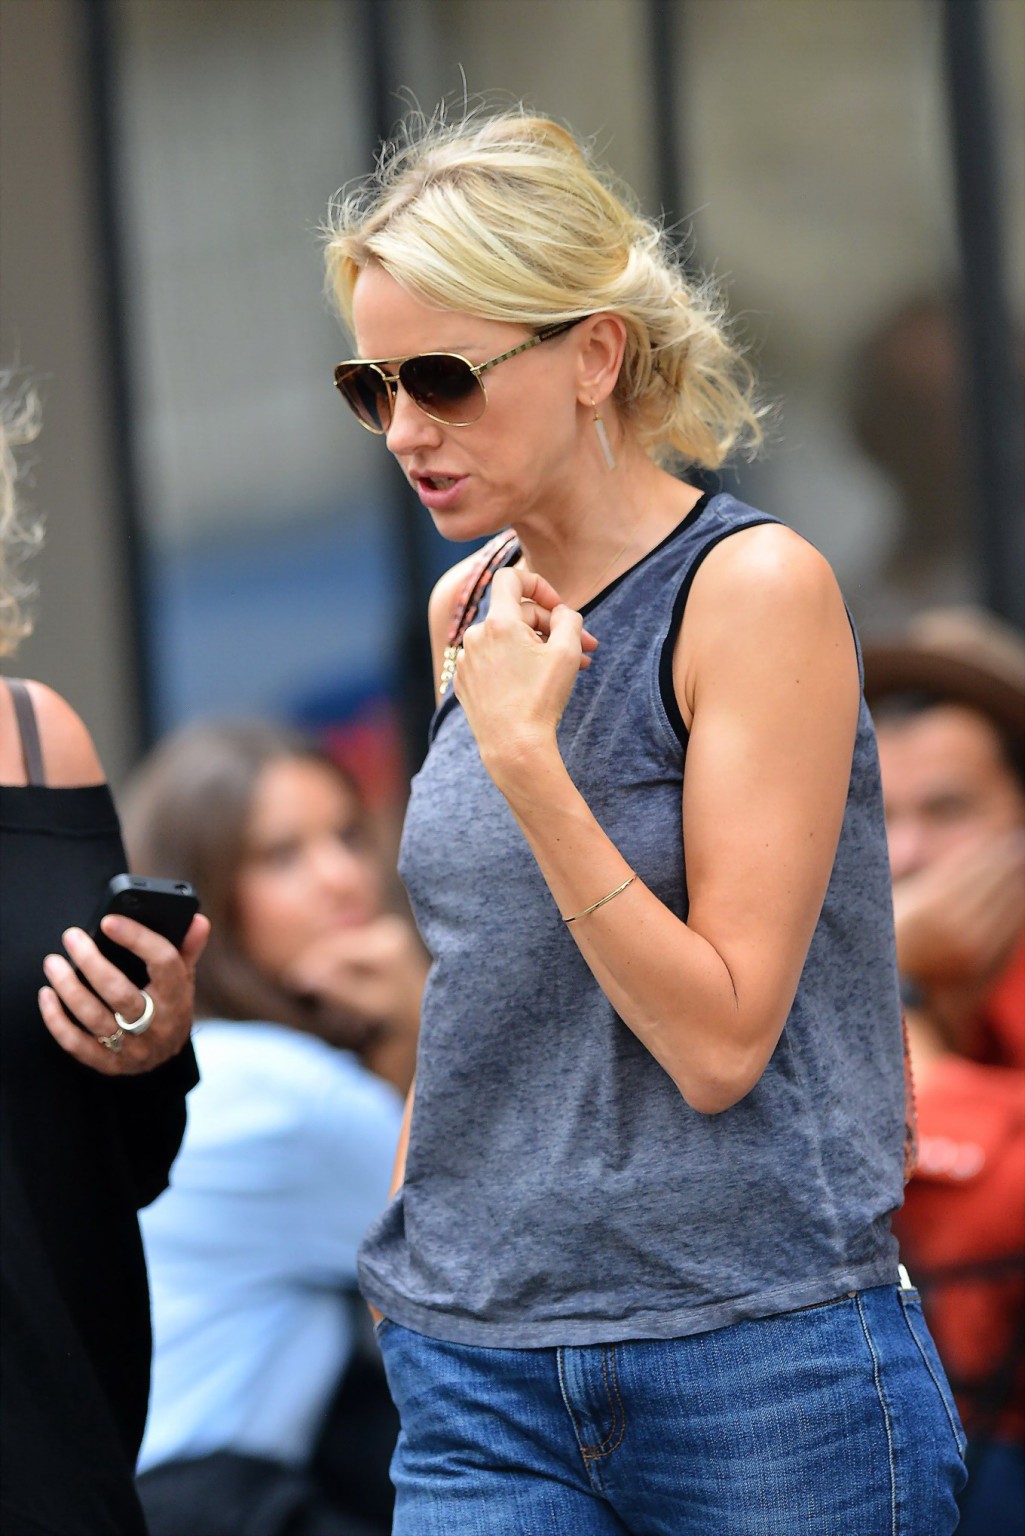 Naomi Watts braless wearing thin top and jeans while shopping in Paris #75209423